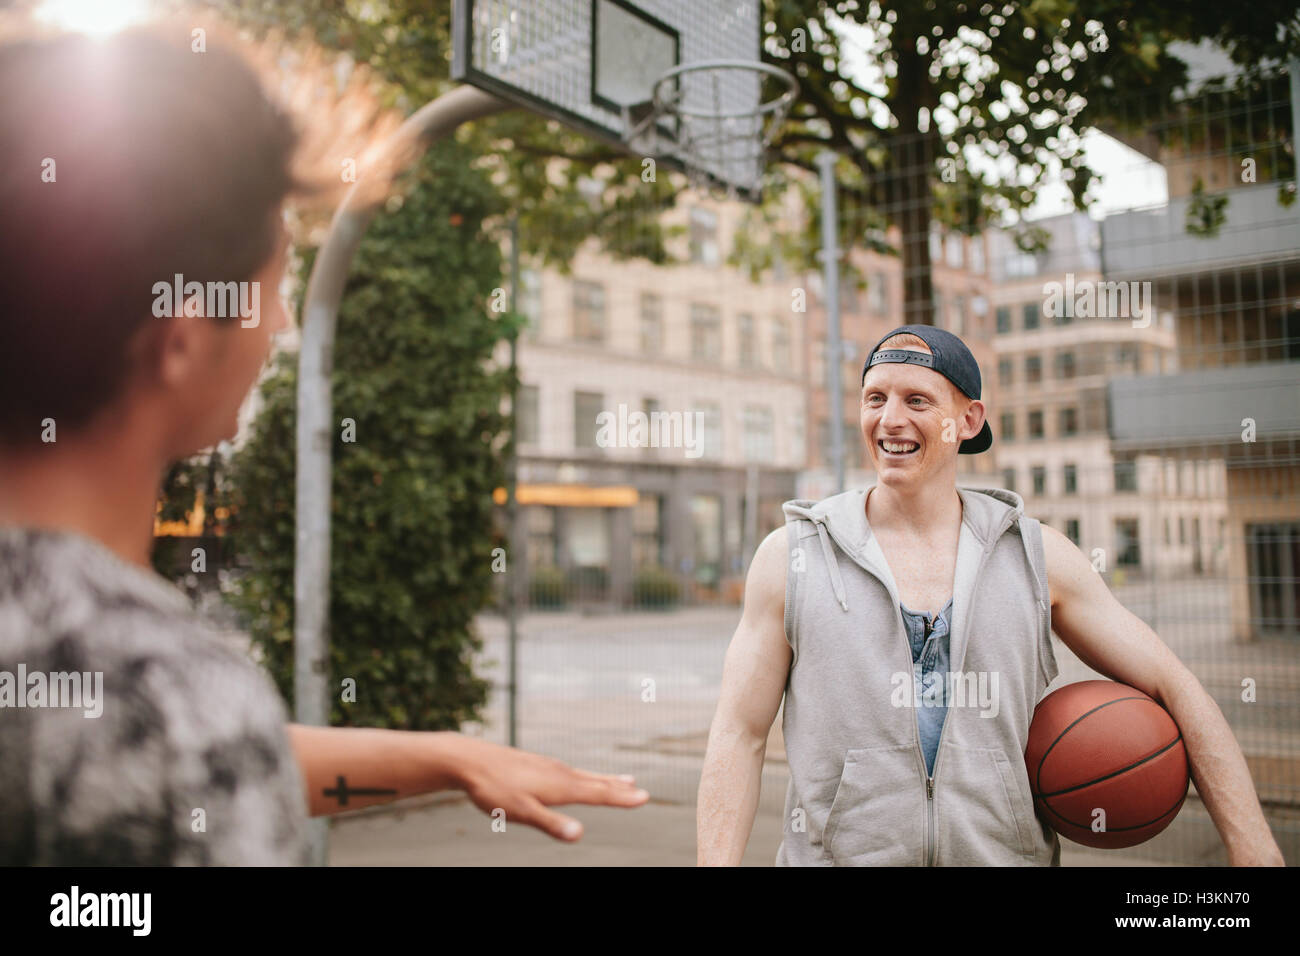 Young man with basketball on court talking with friend. Streetball players on court. Stock Photo